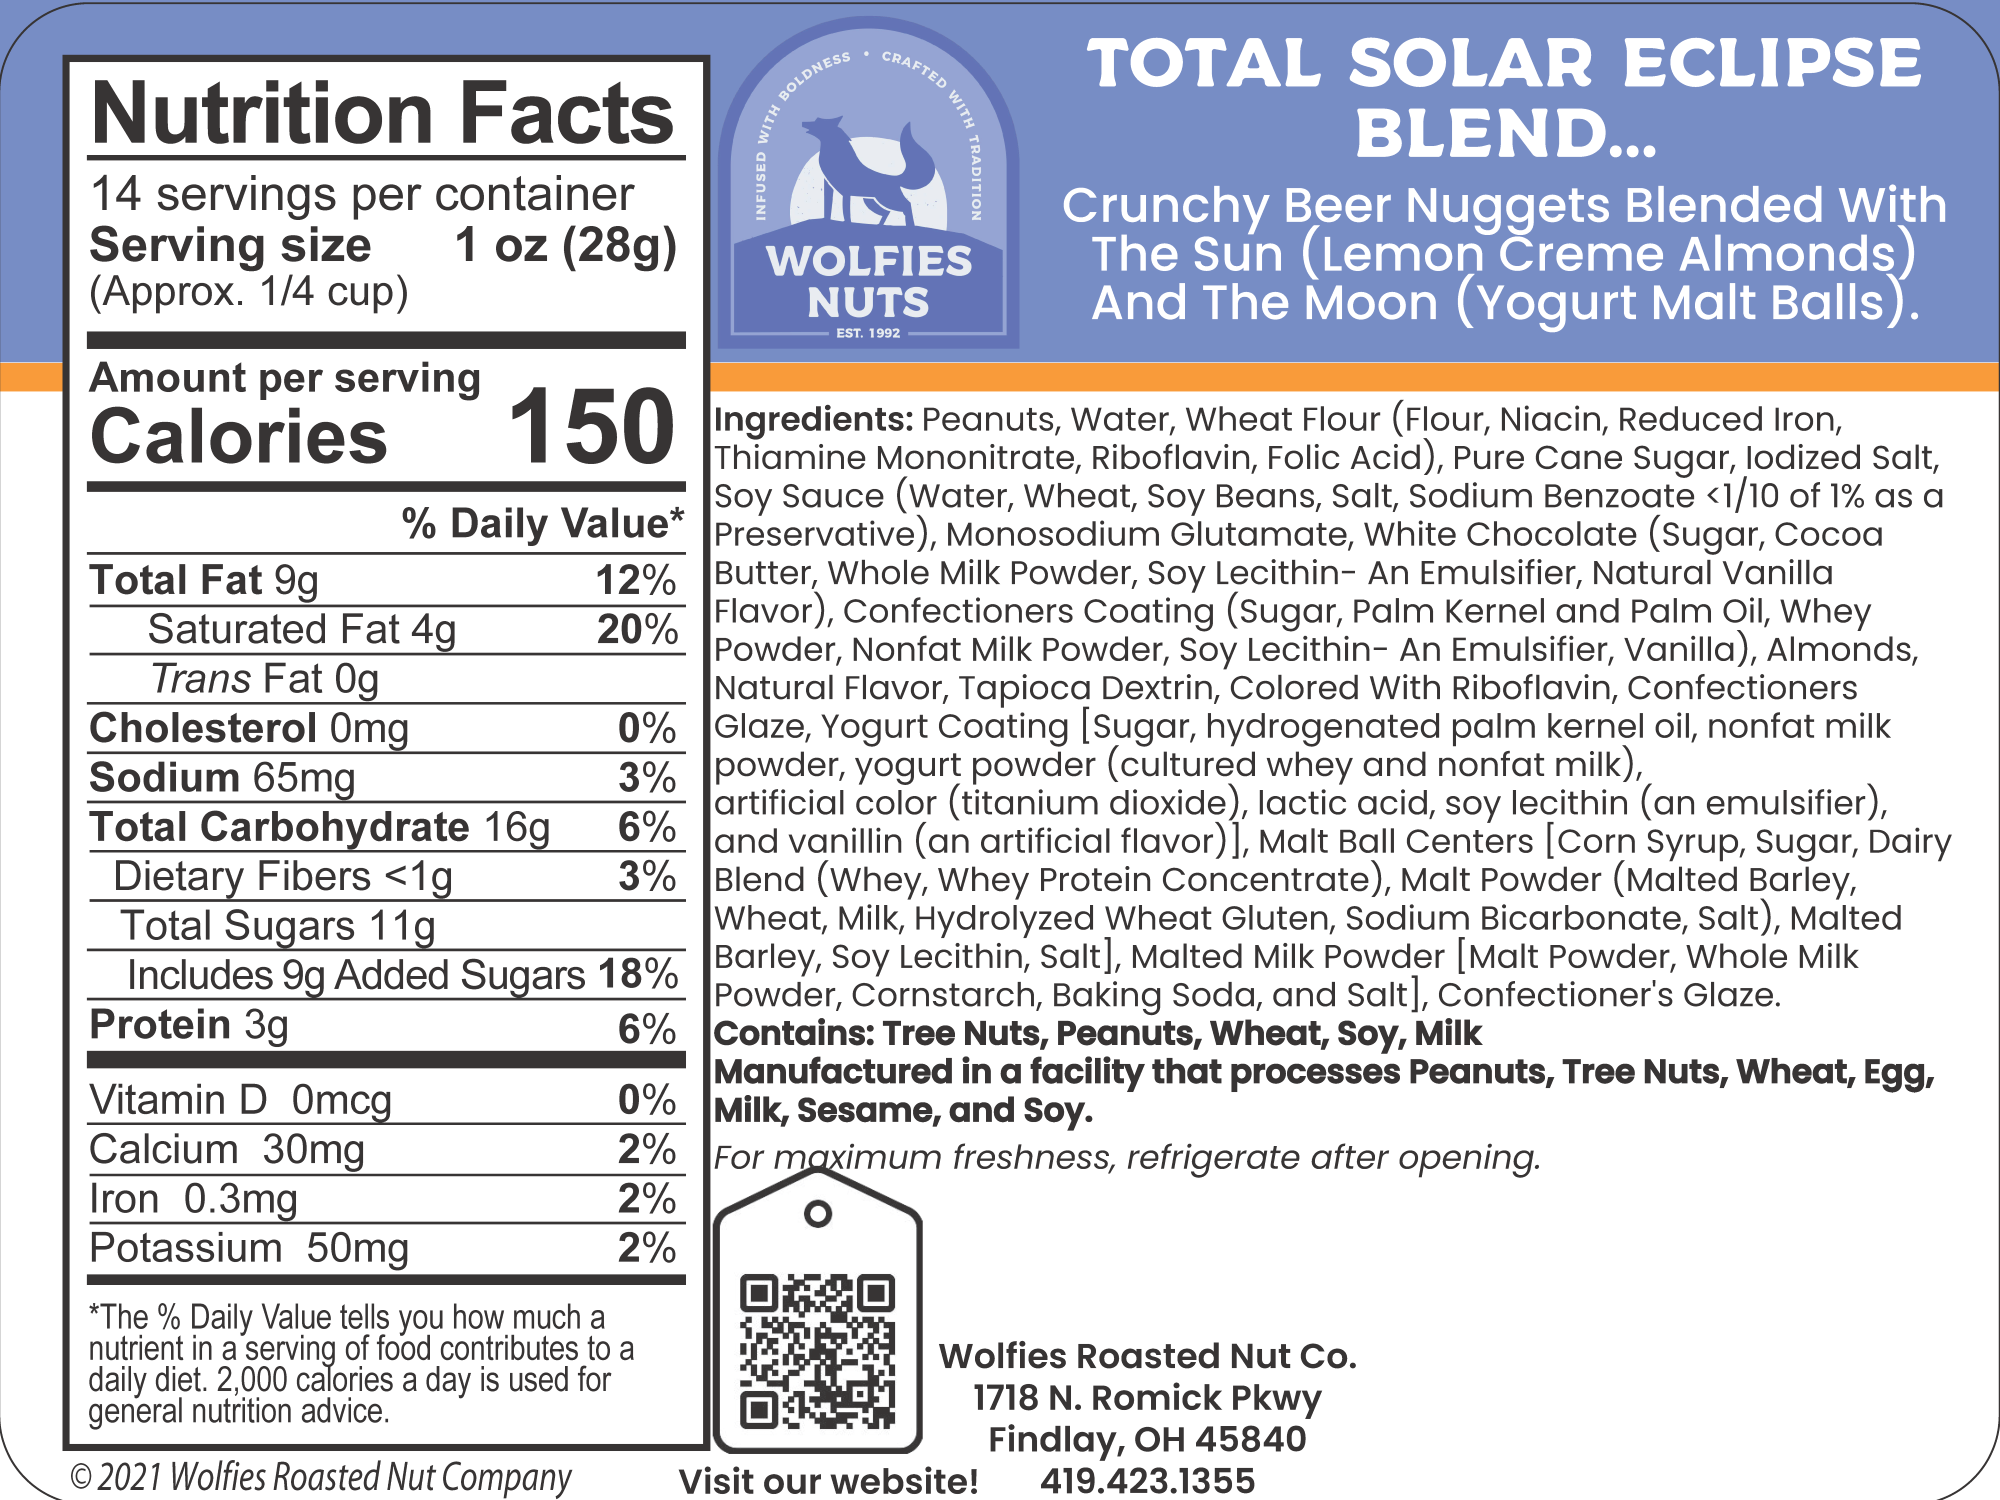 *Limited Edition* Total Solar Eclipse Blend